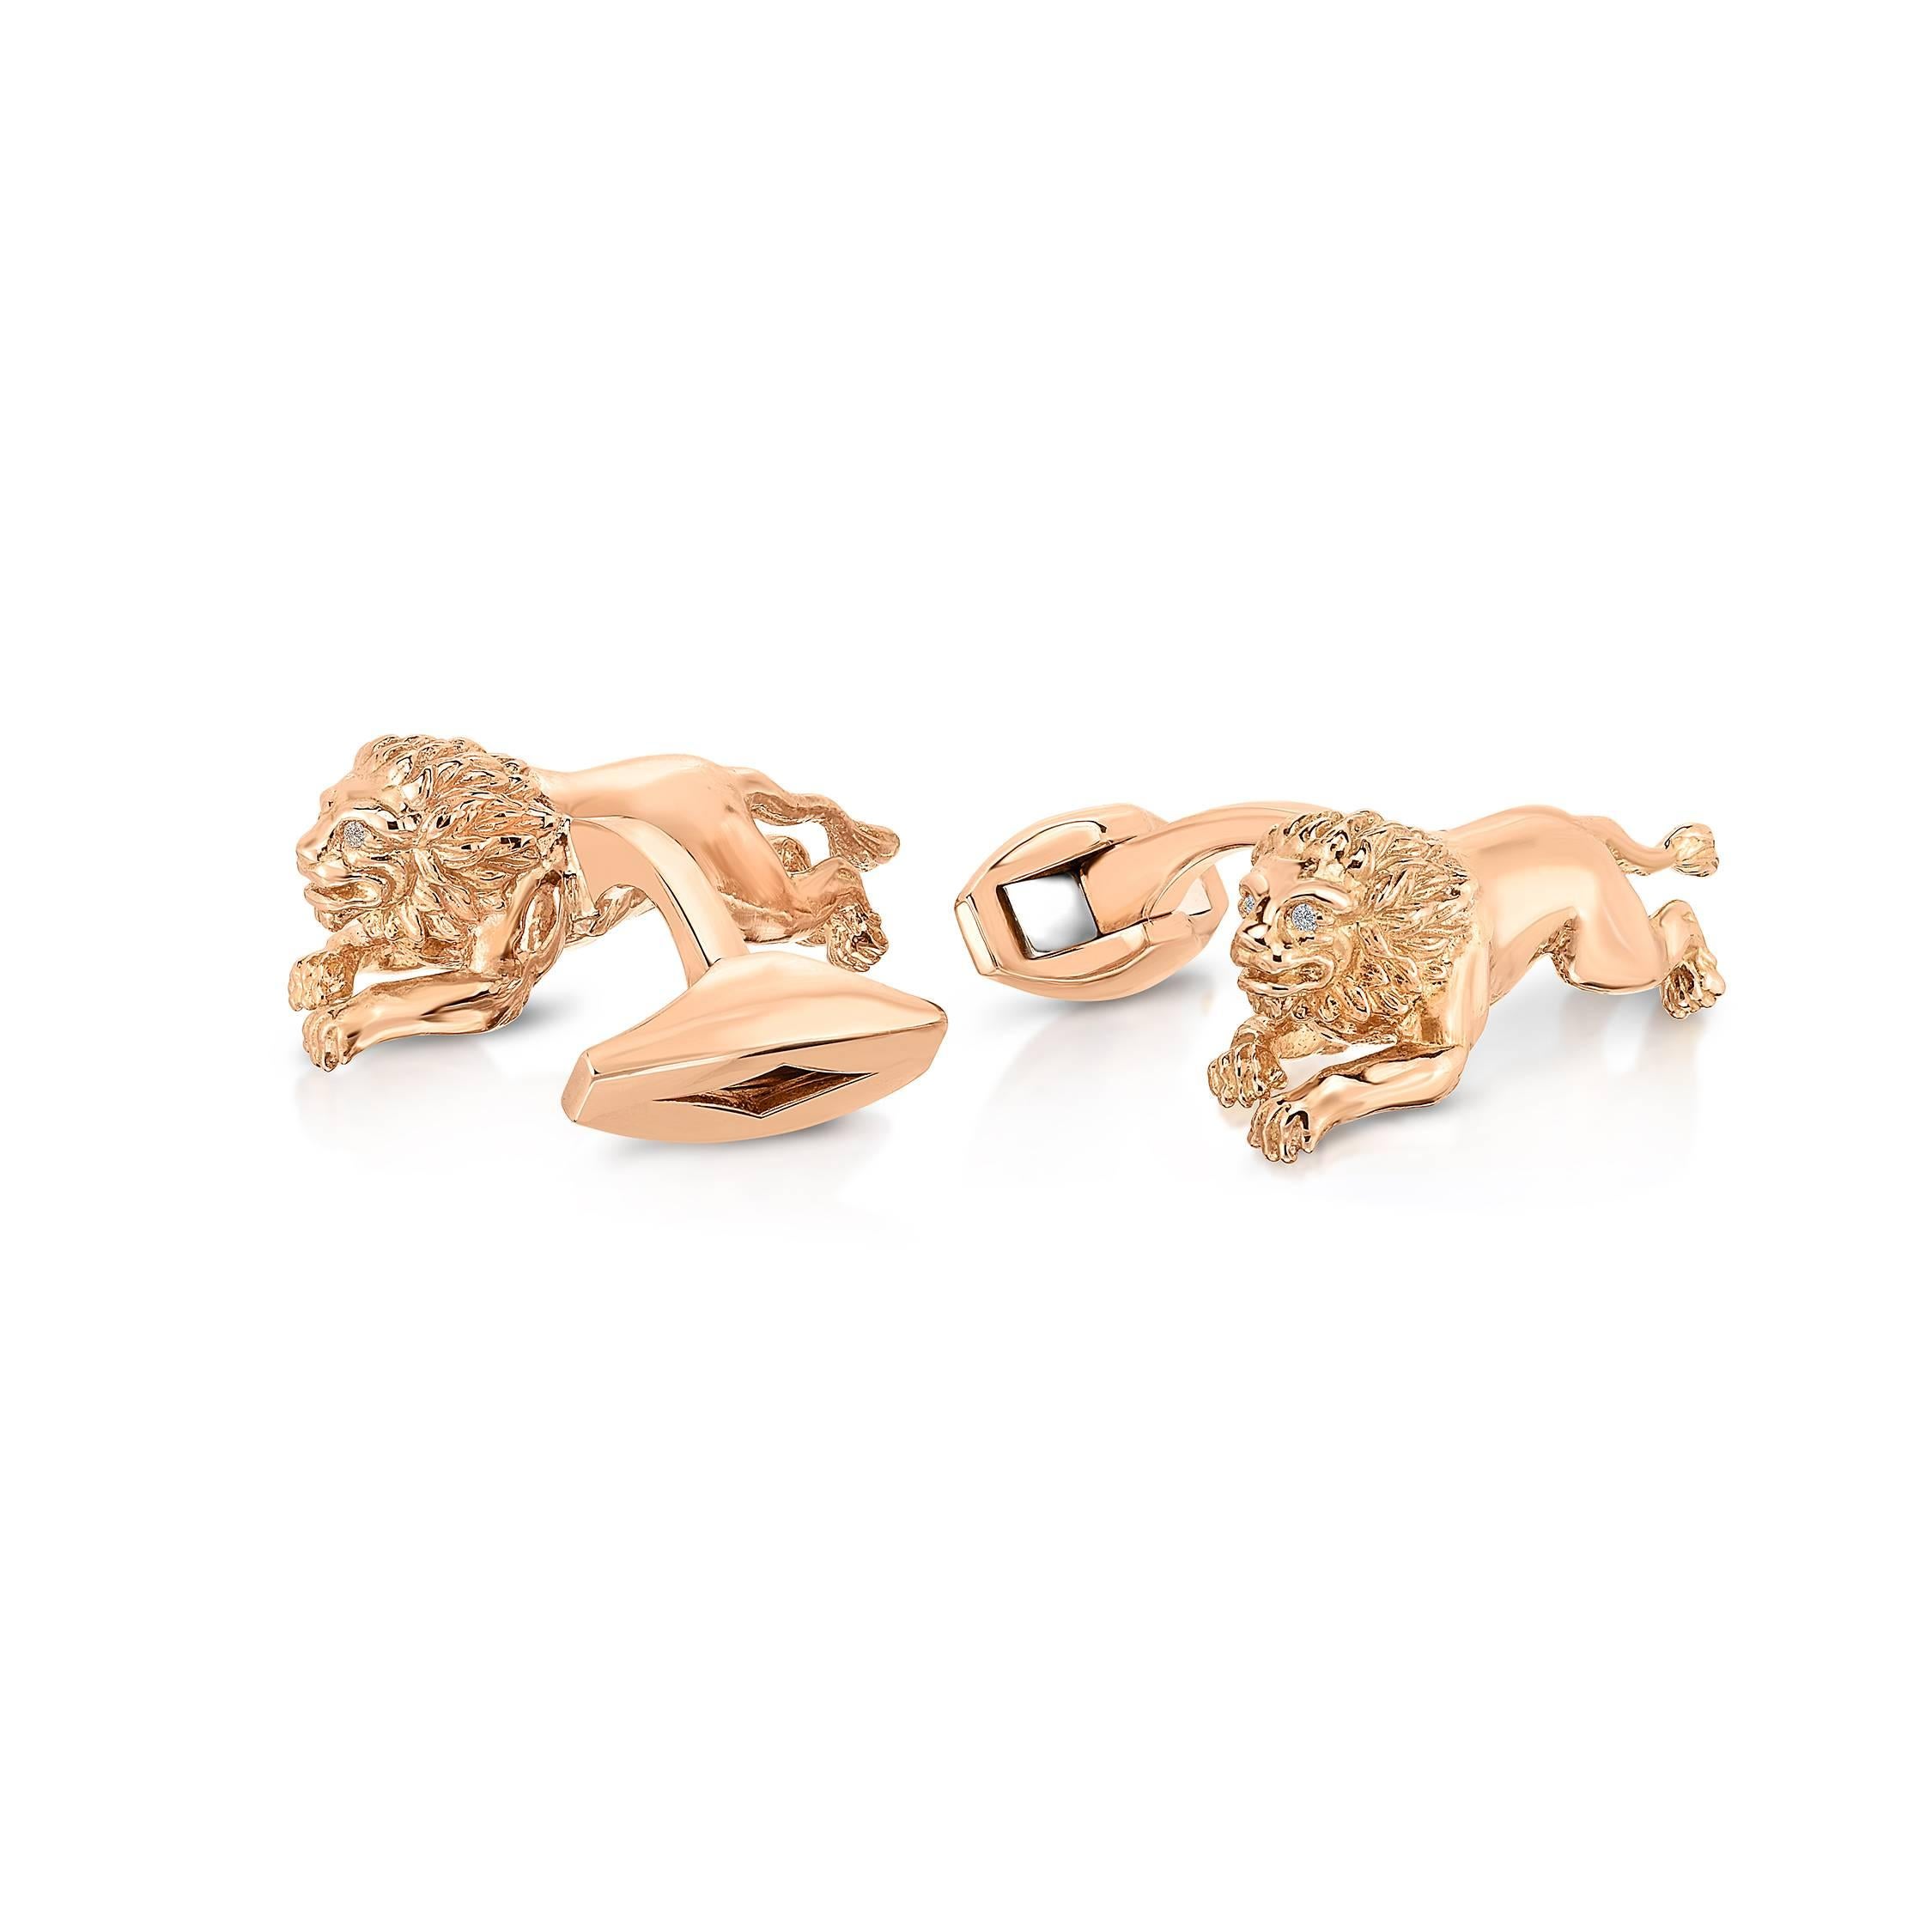 Contemporary Marisa Perry's Rose Gold and Diamond Lion Cufflinks For Sale